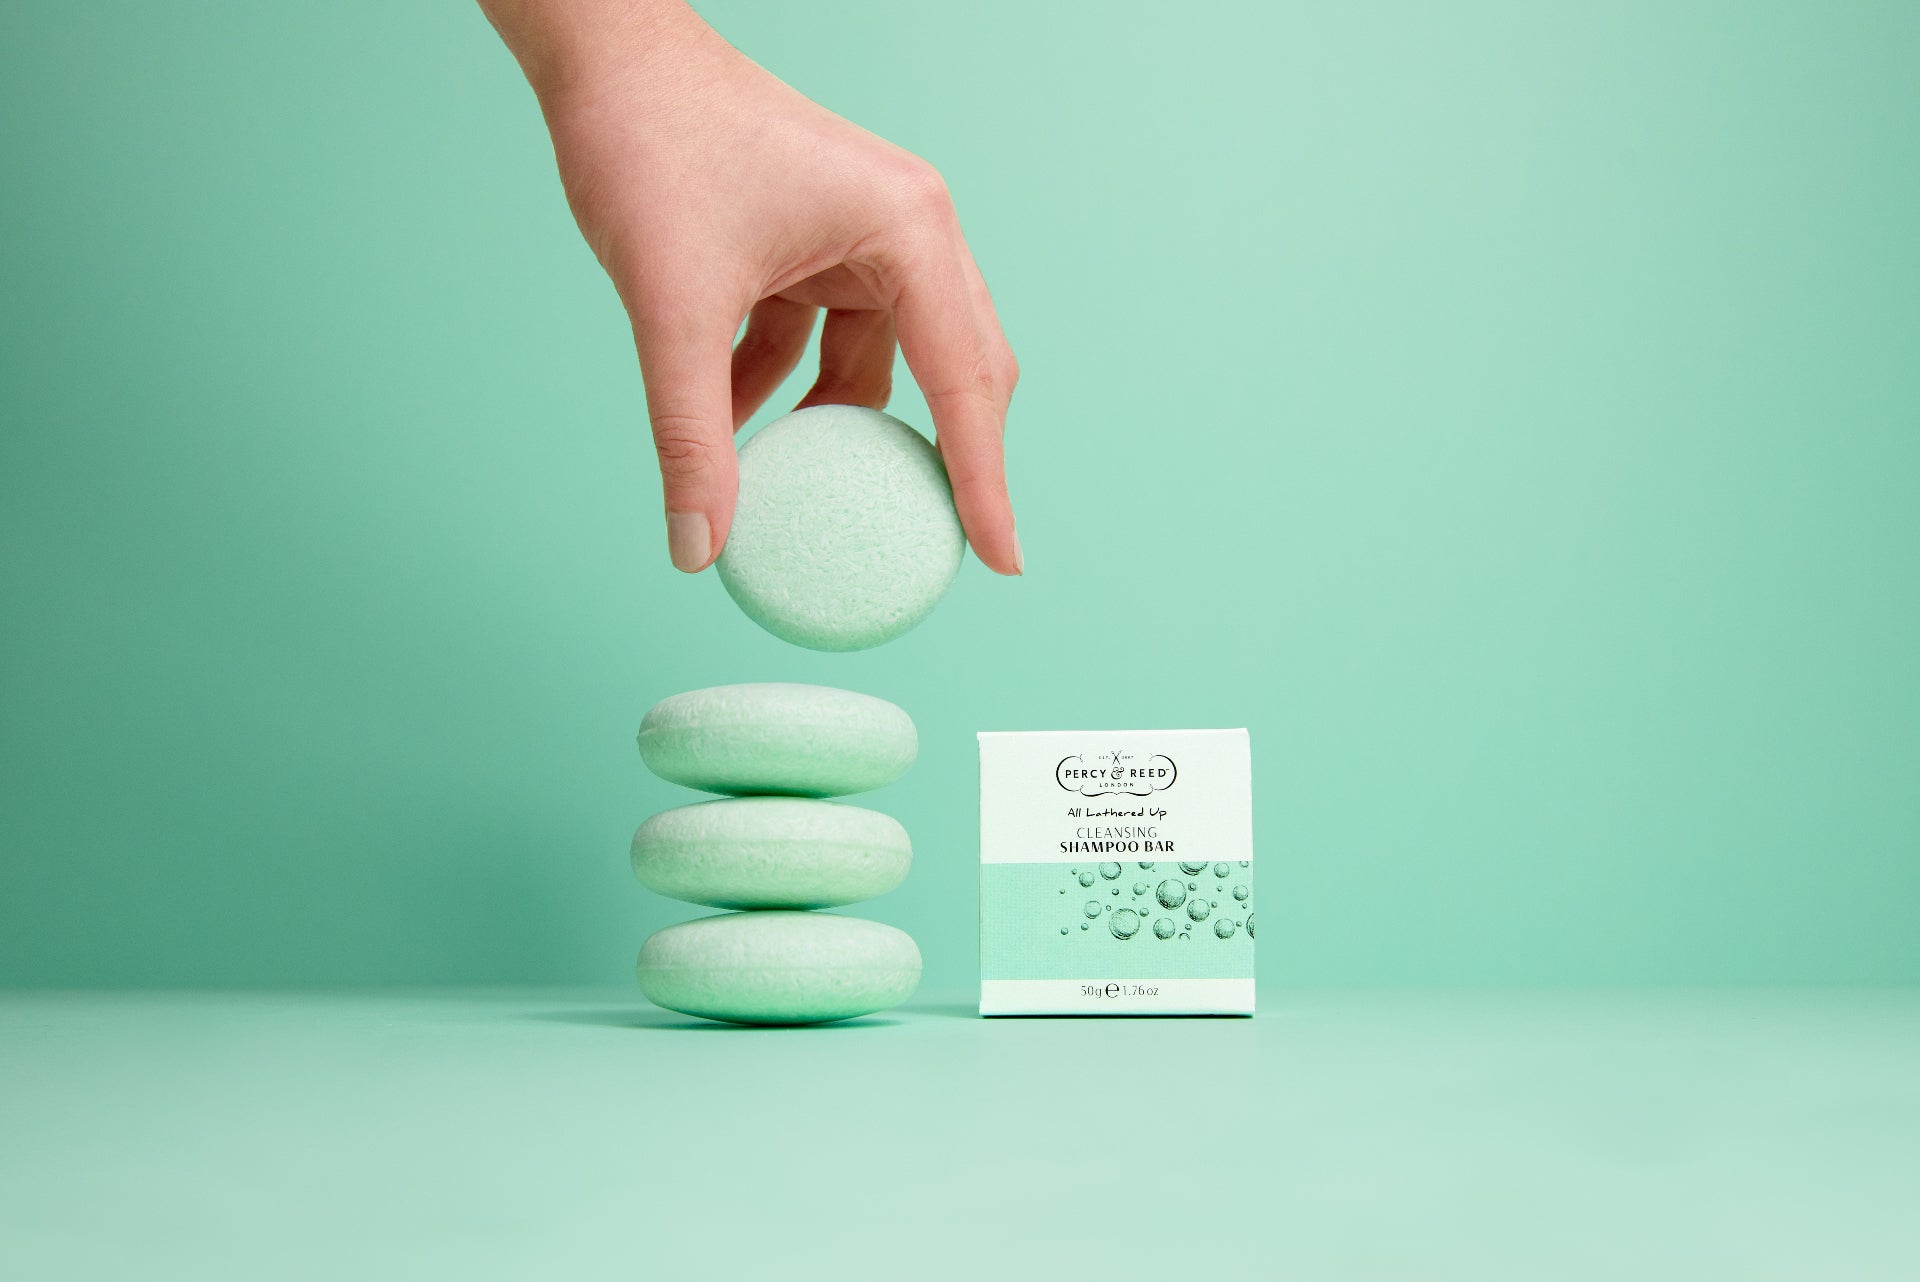 Percy & Reed All Lathered Up Cleansing Shampoo Bar